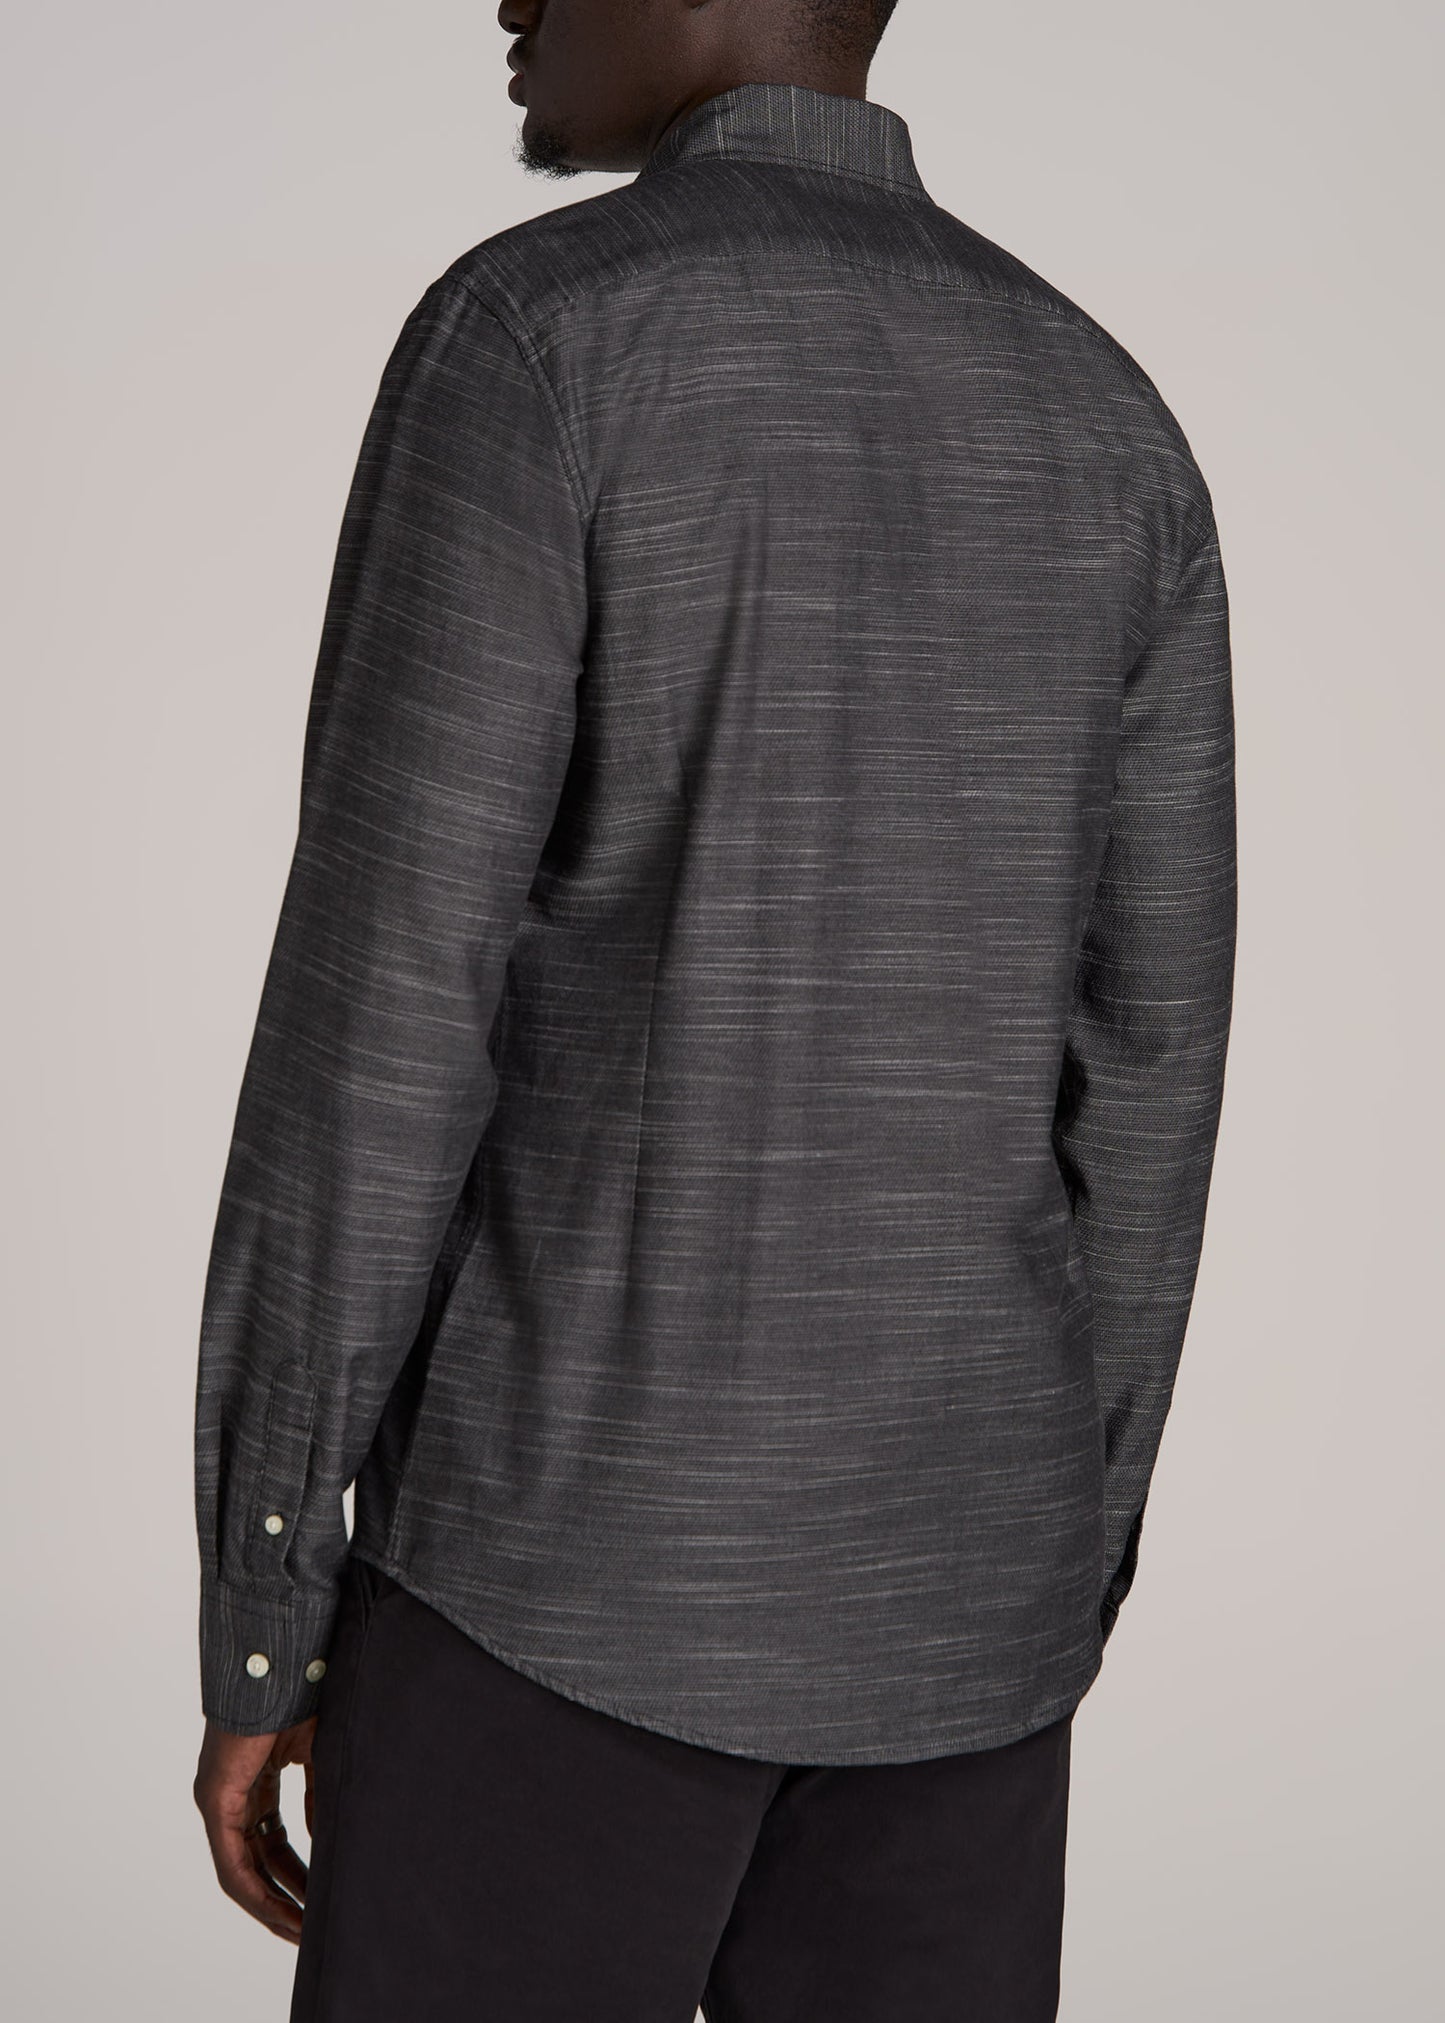 Textured Weave Cotton Button-Up Shirt for Tall Men in Black